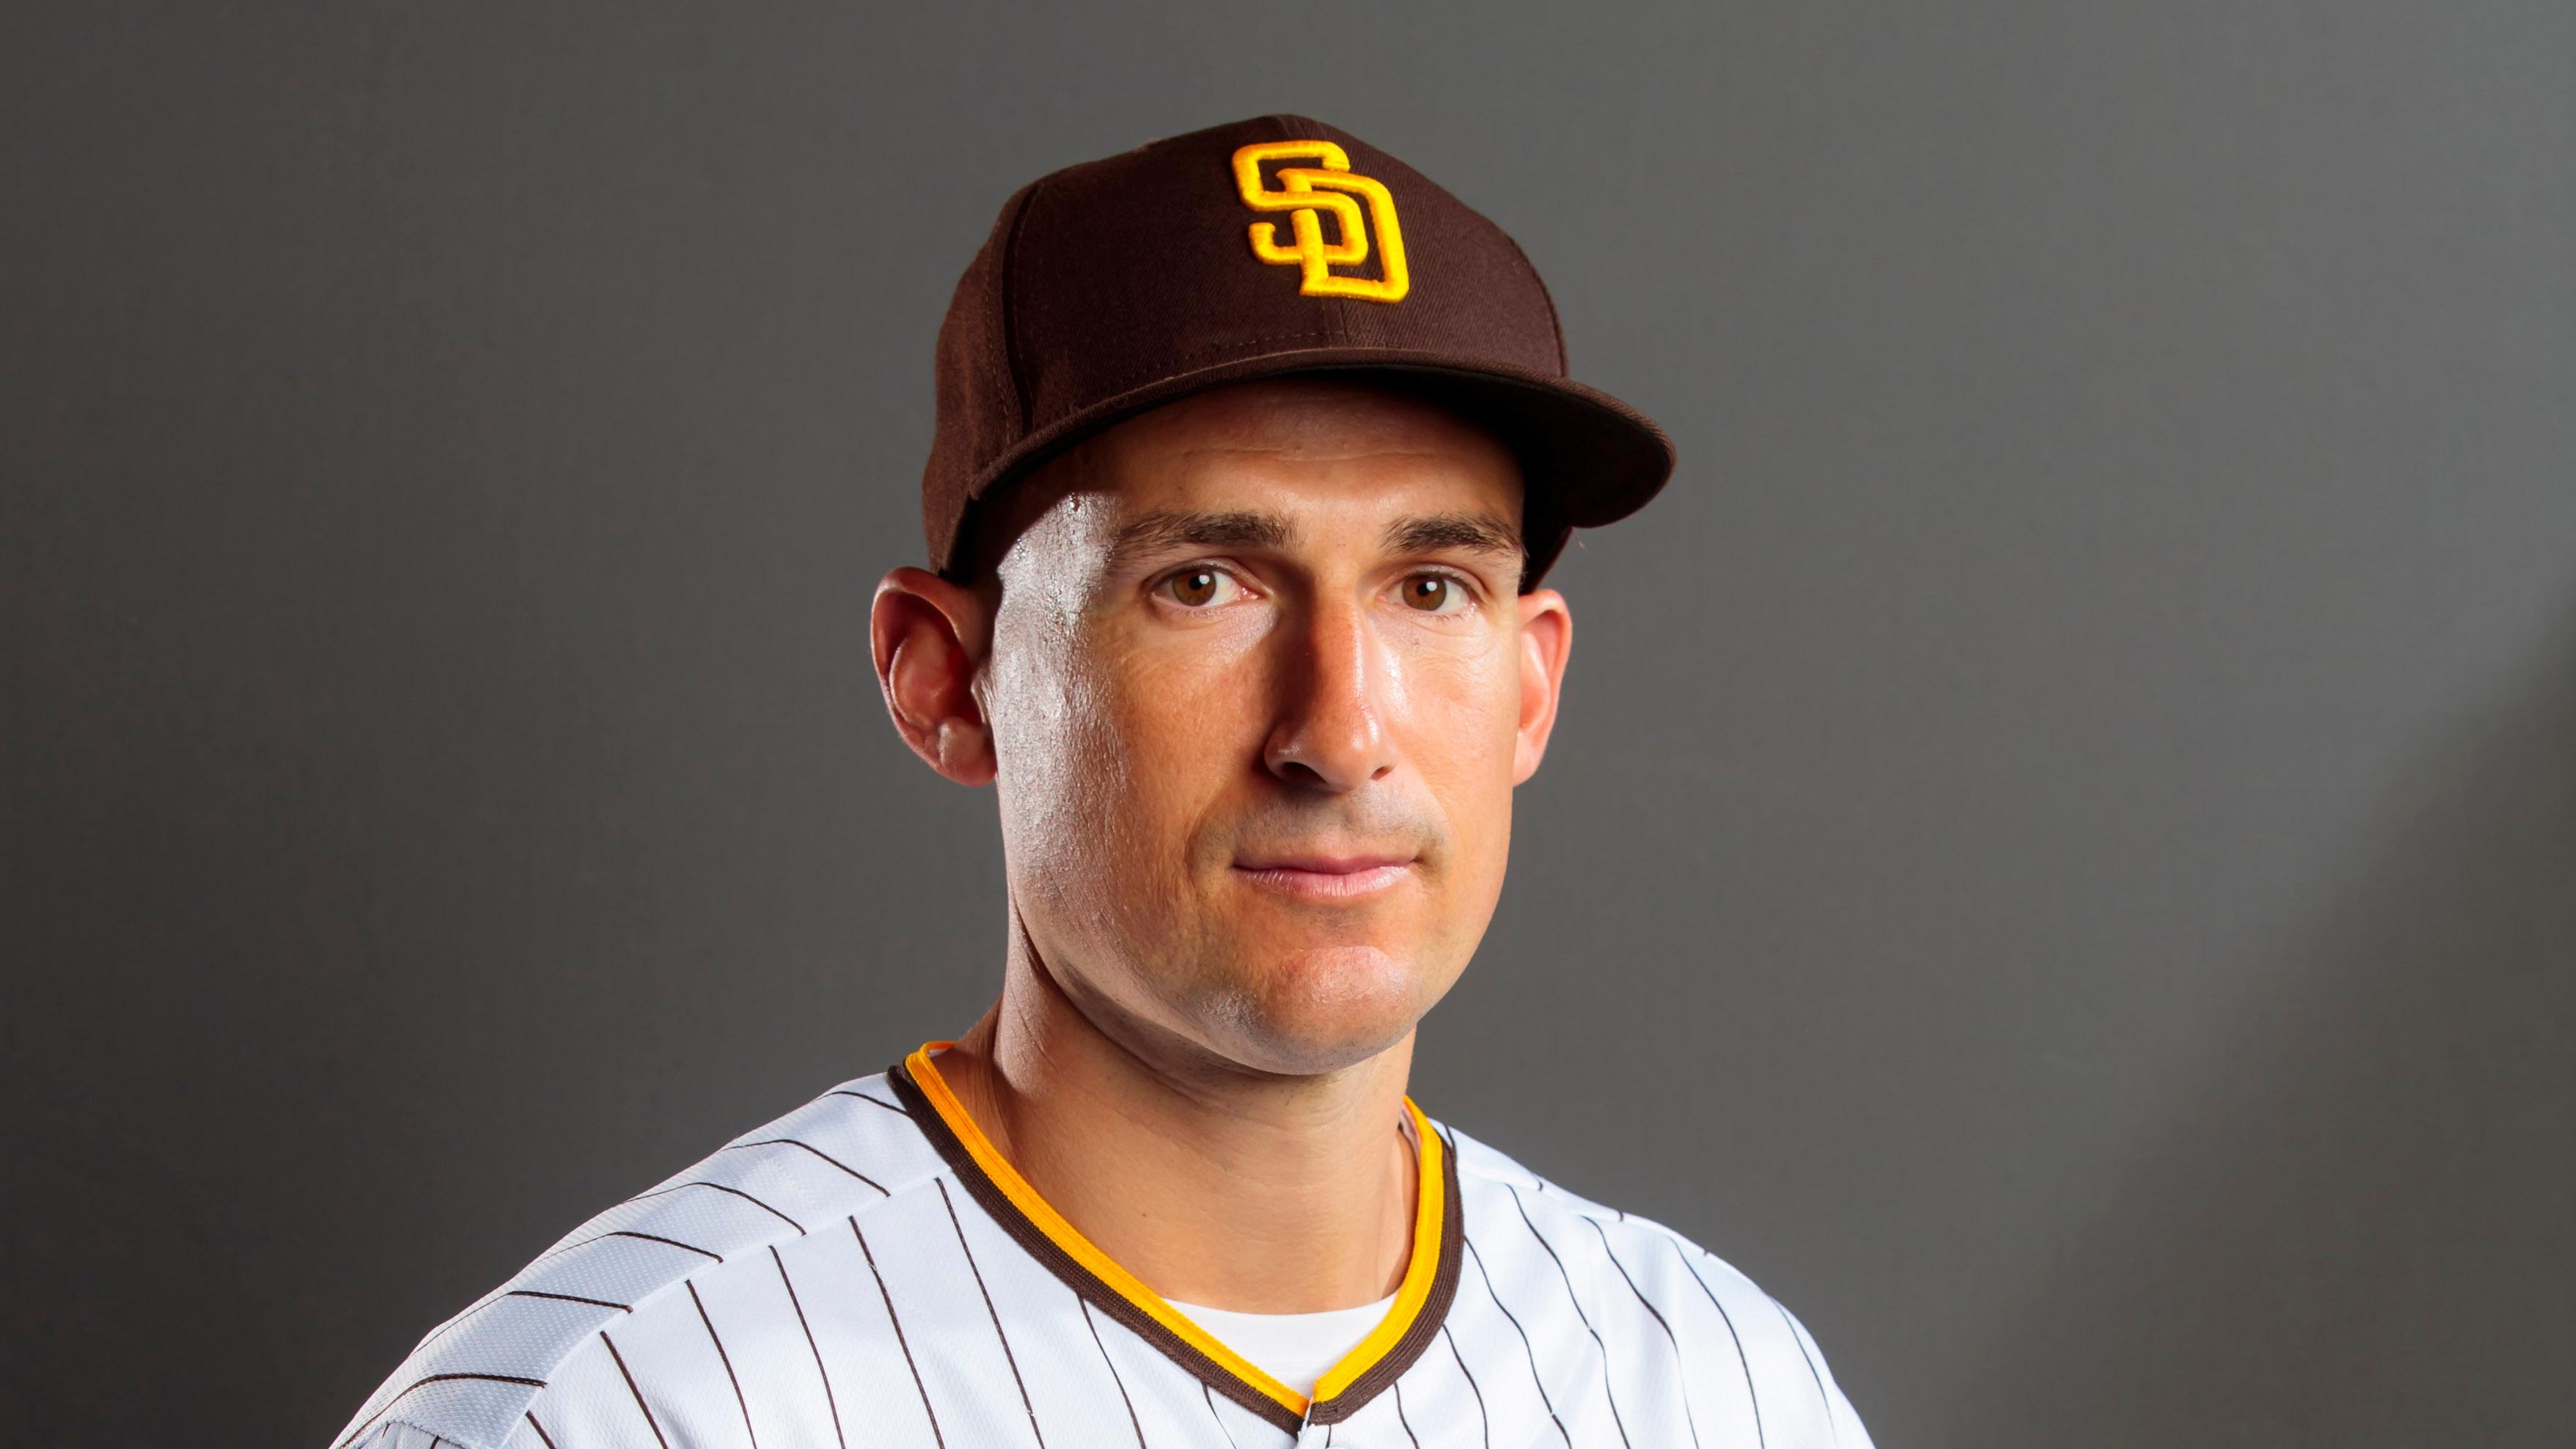 San Diego Padres development coach Ryan Flaherty poses for a portrait during media day at Peoria Sports Complex. / Mark J. Rebilas-USA TODAY Sports